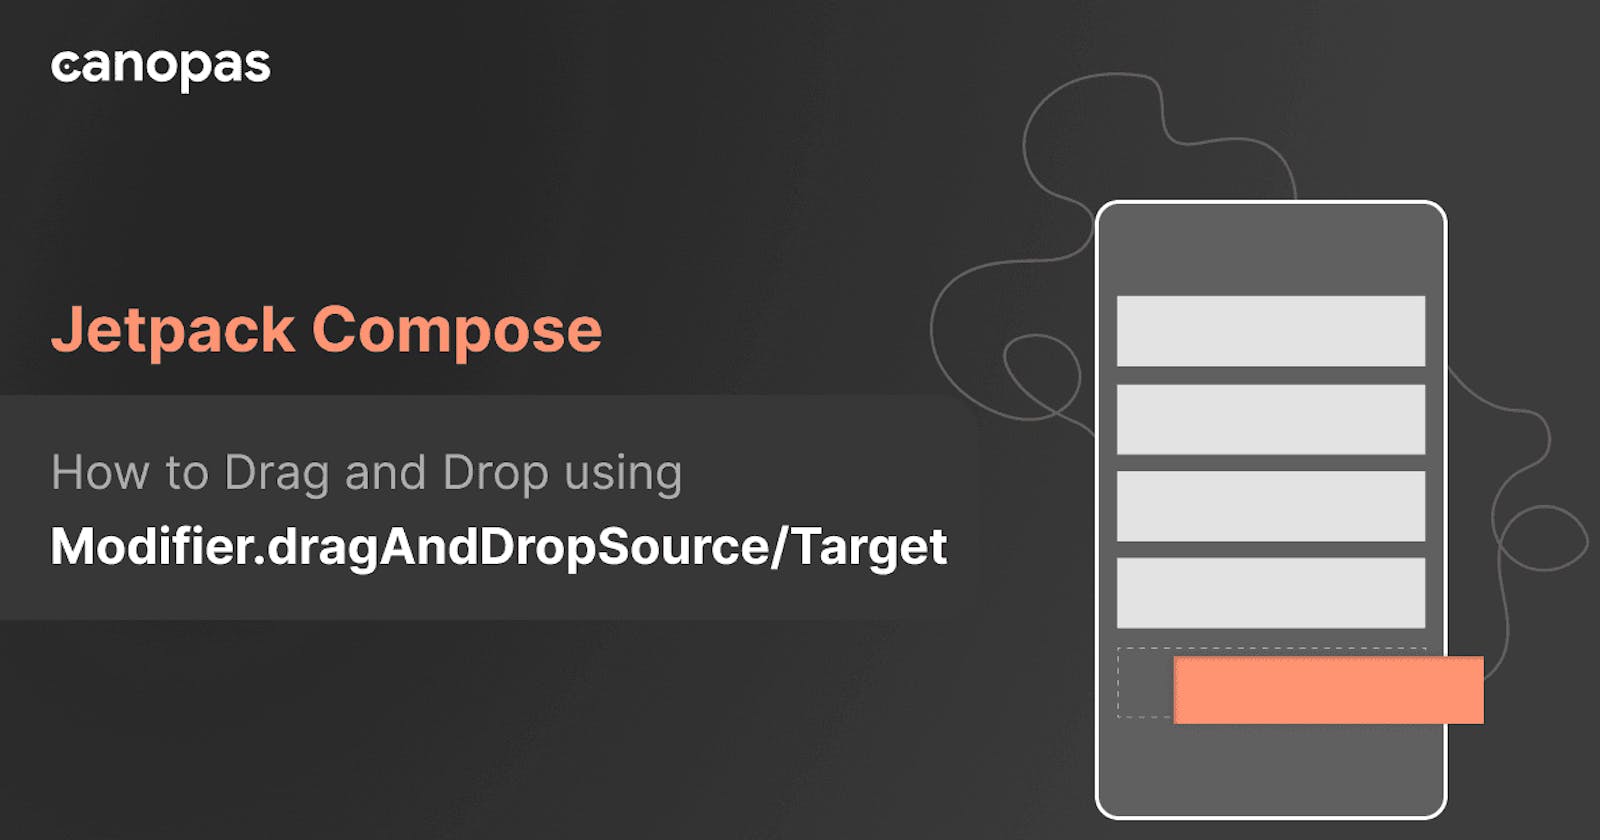 How to Drag and Drop using Modifier.dragAndDropSource/Target - Jetpack Compose